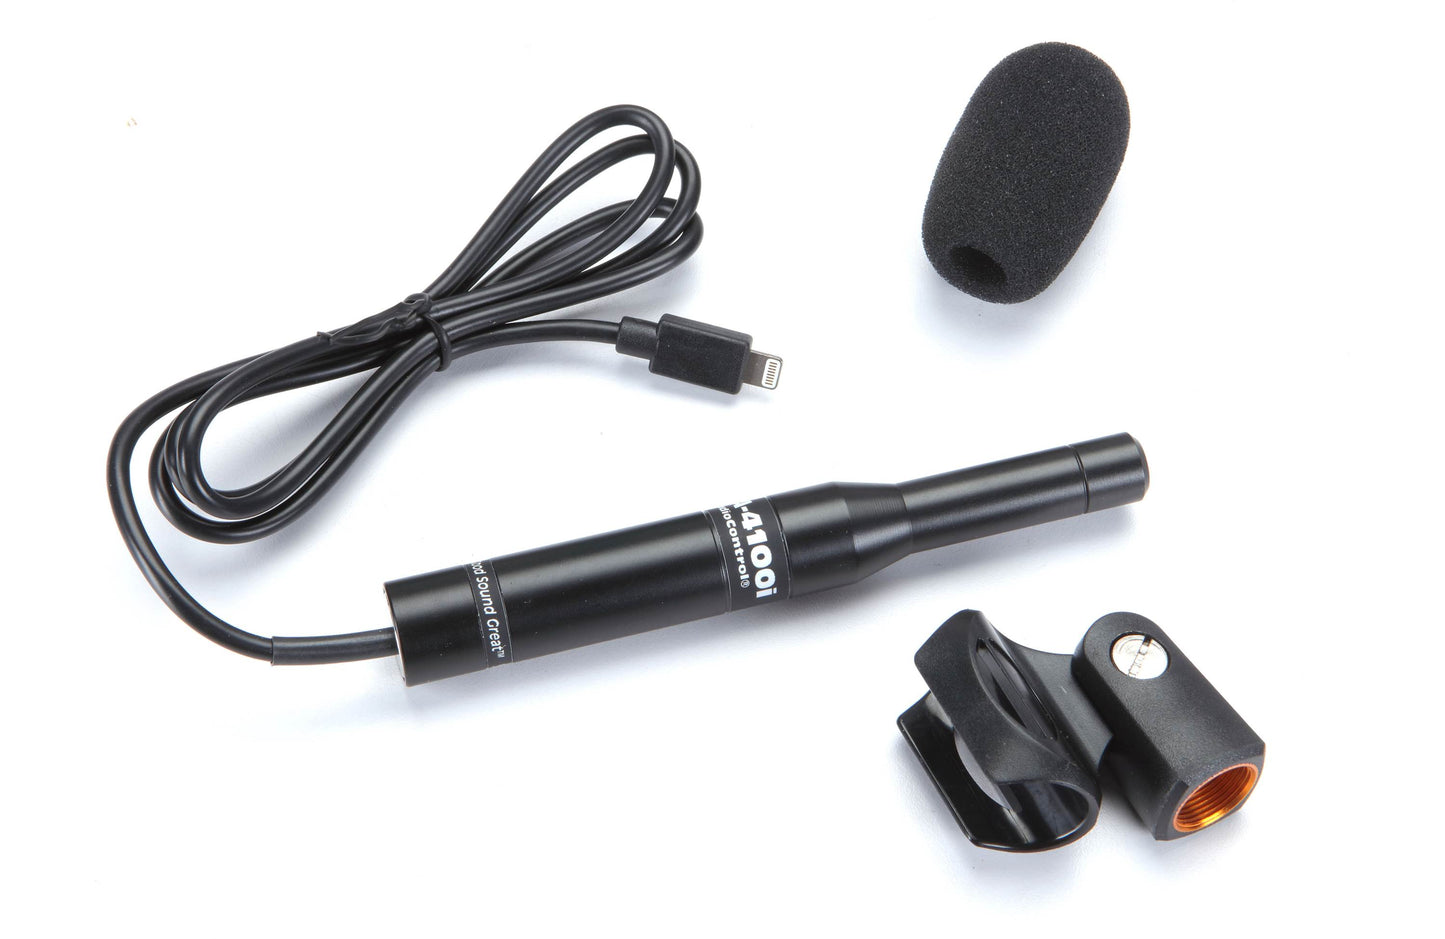 AudioControl SA-4100i Omnidirectional test microphone for iOS devices — analyze your sound system